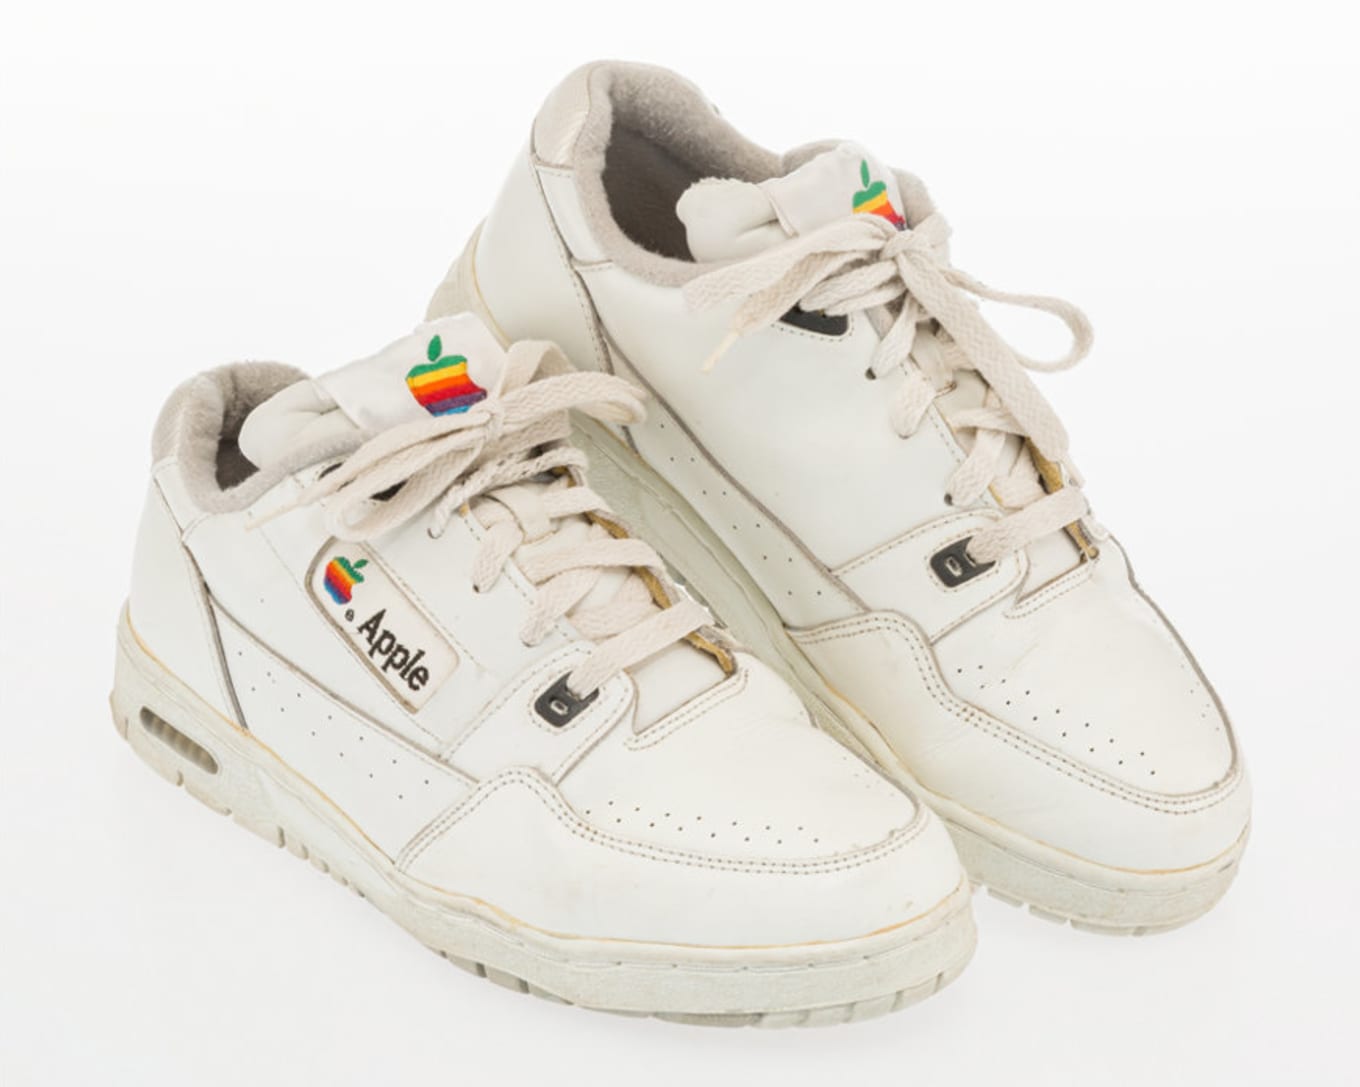 Rare Apple Sneakers Just Sold for 